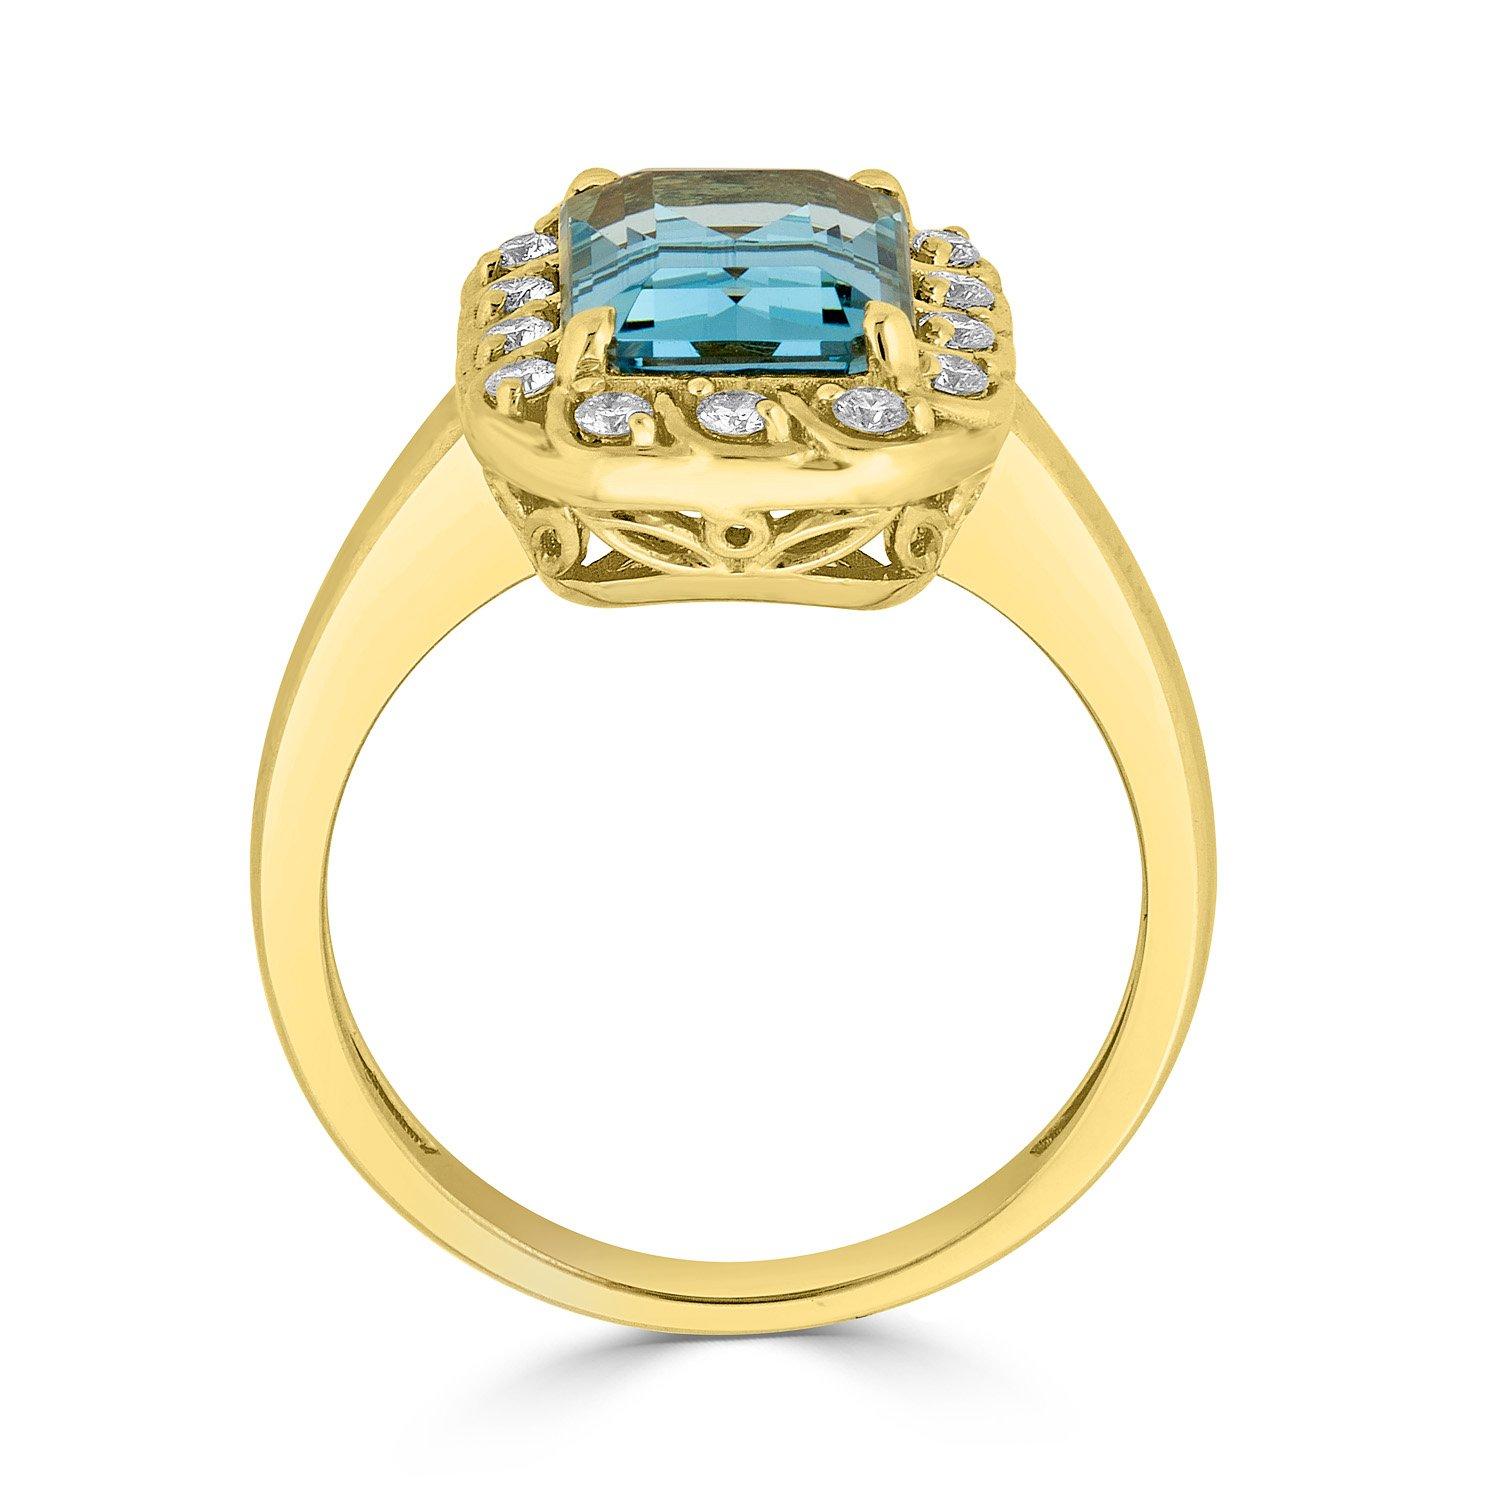 Emerald Cut 3.03ct Aquamarine Ring with 0.23tct Diamonds Set in 14k Yellow Gold For Sale